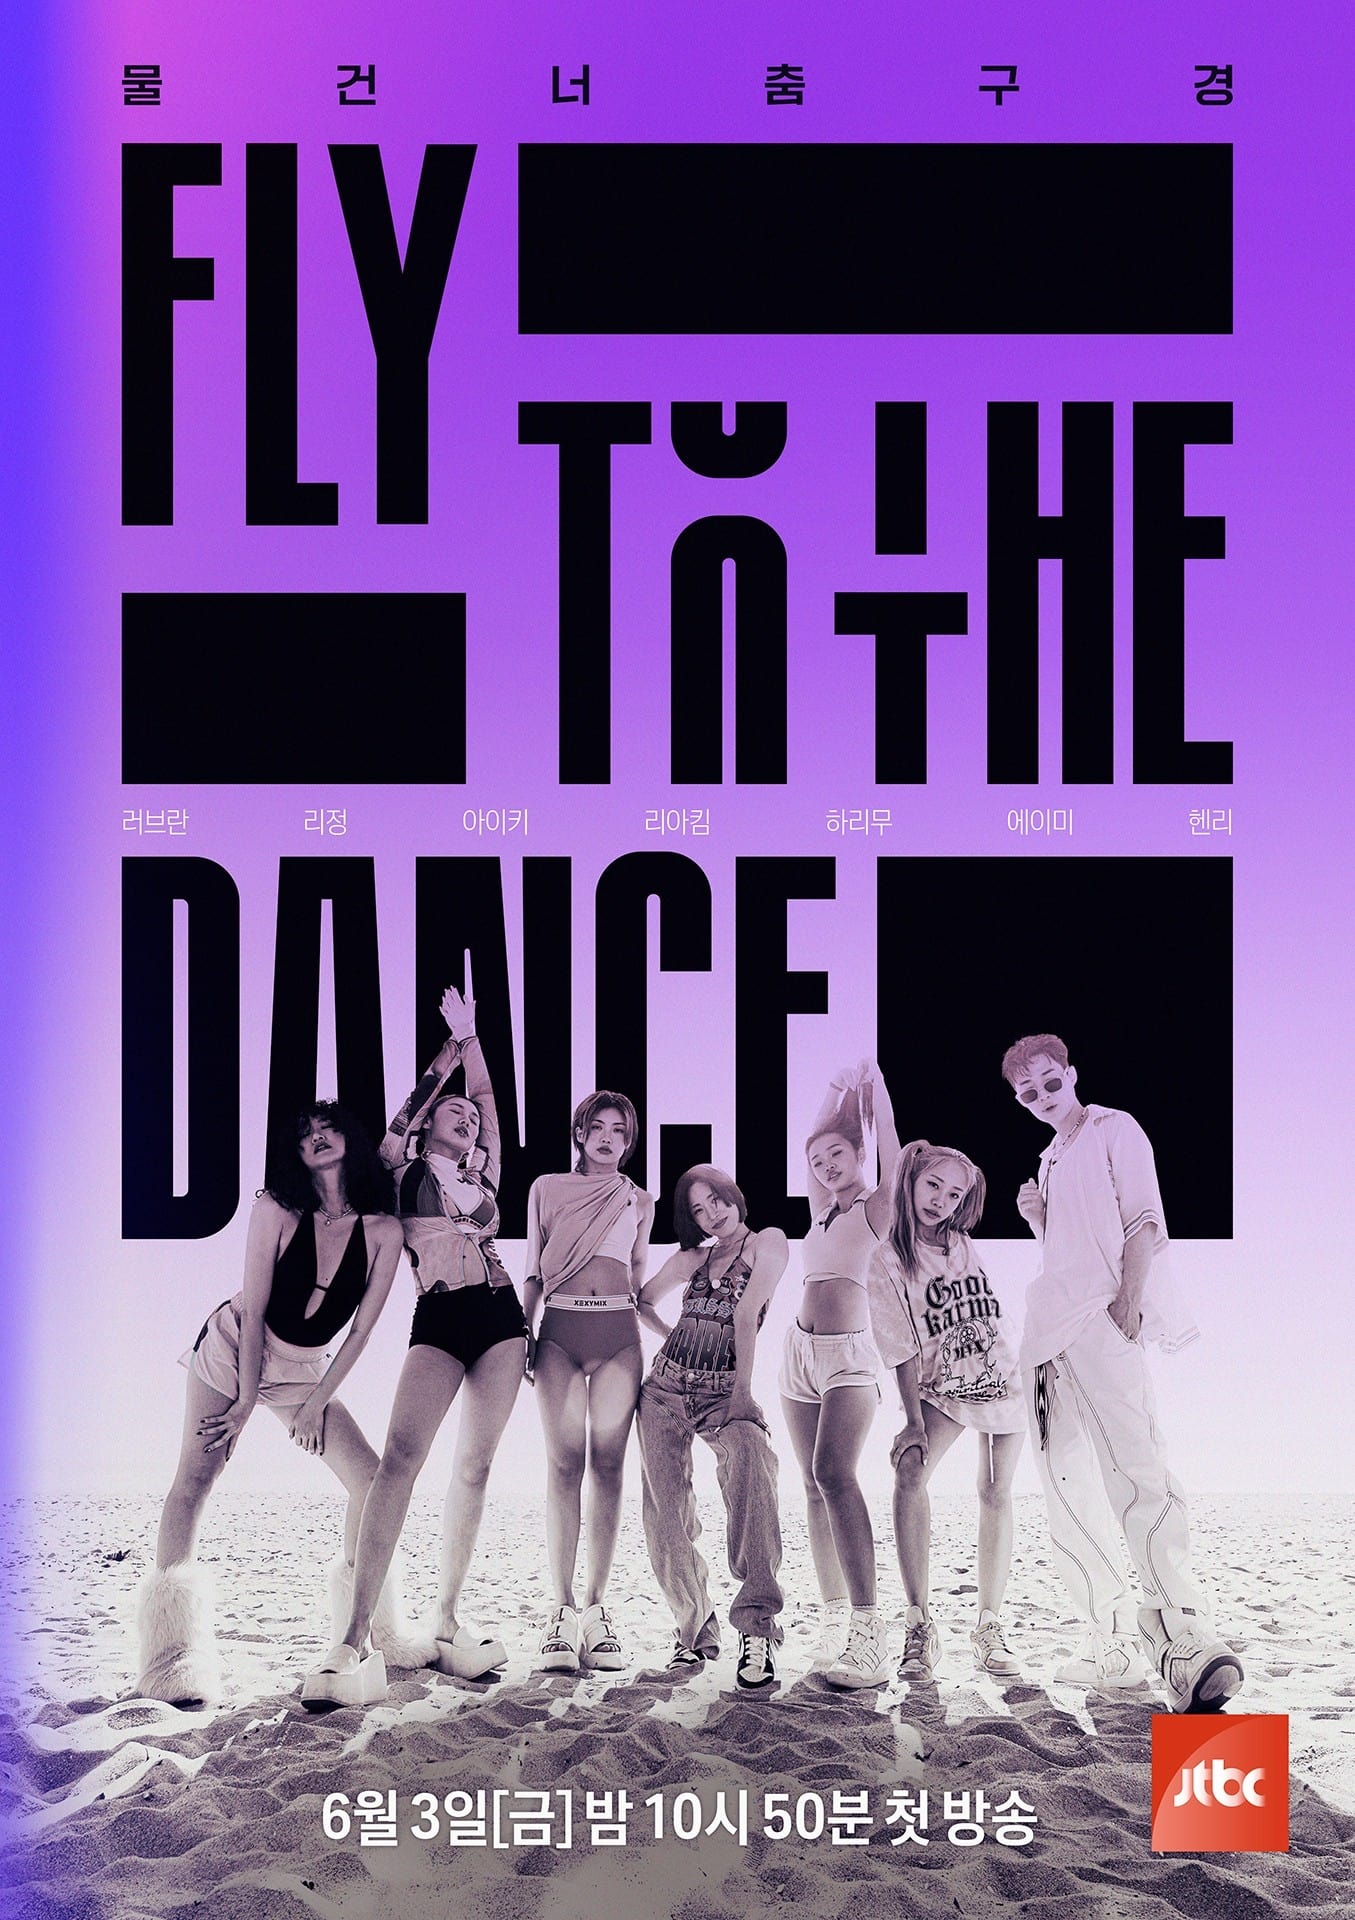 TV ratings for Fly To The Dance (플라이 투 더 댄스) in Rusia. JTBC TV series